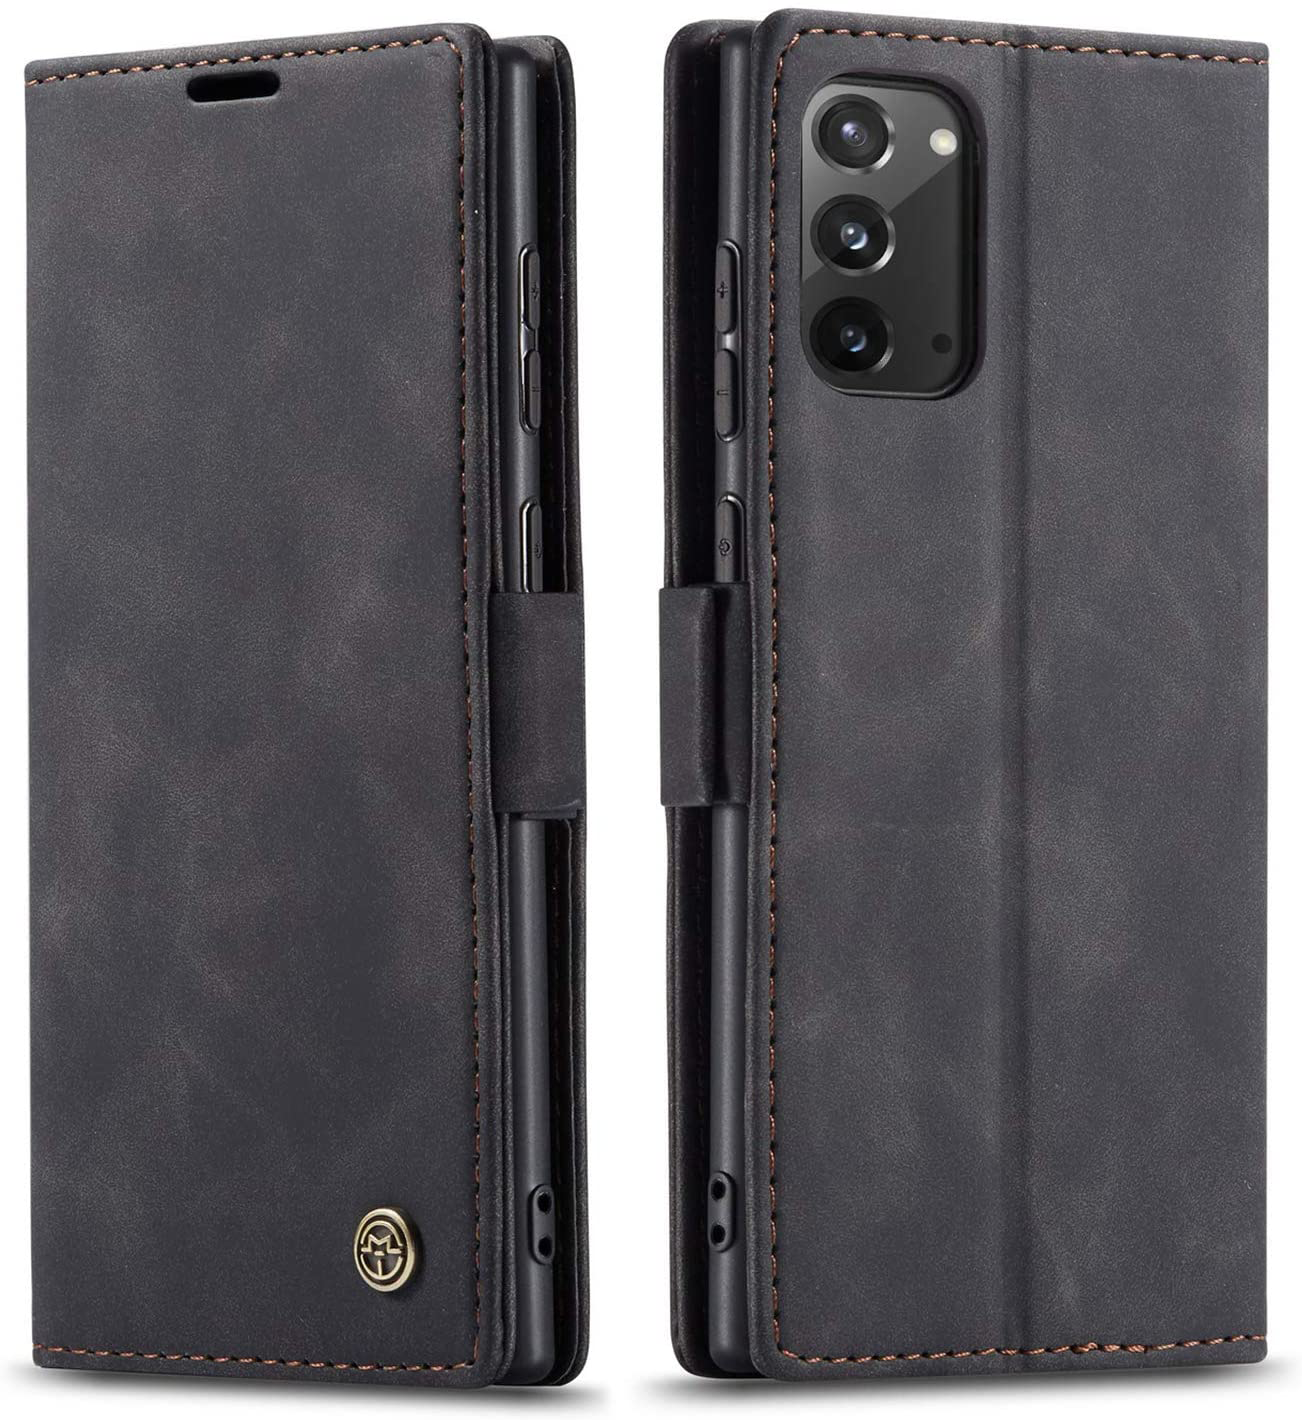 Samsung Galaxy Note 20 black color leather wallet flip cover case By excelsior